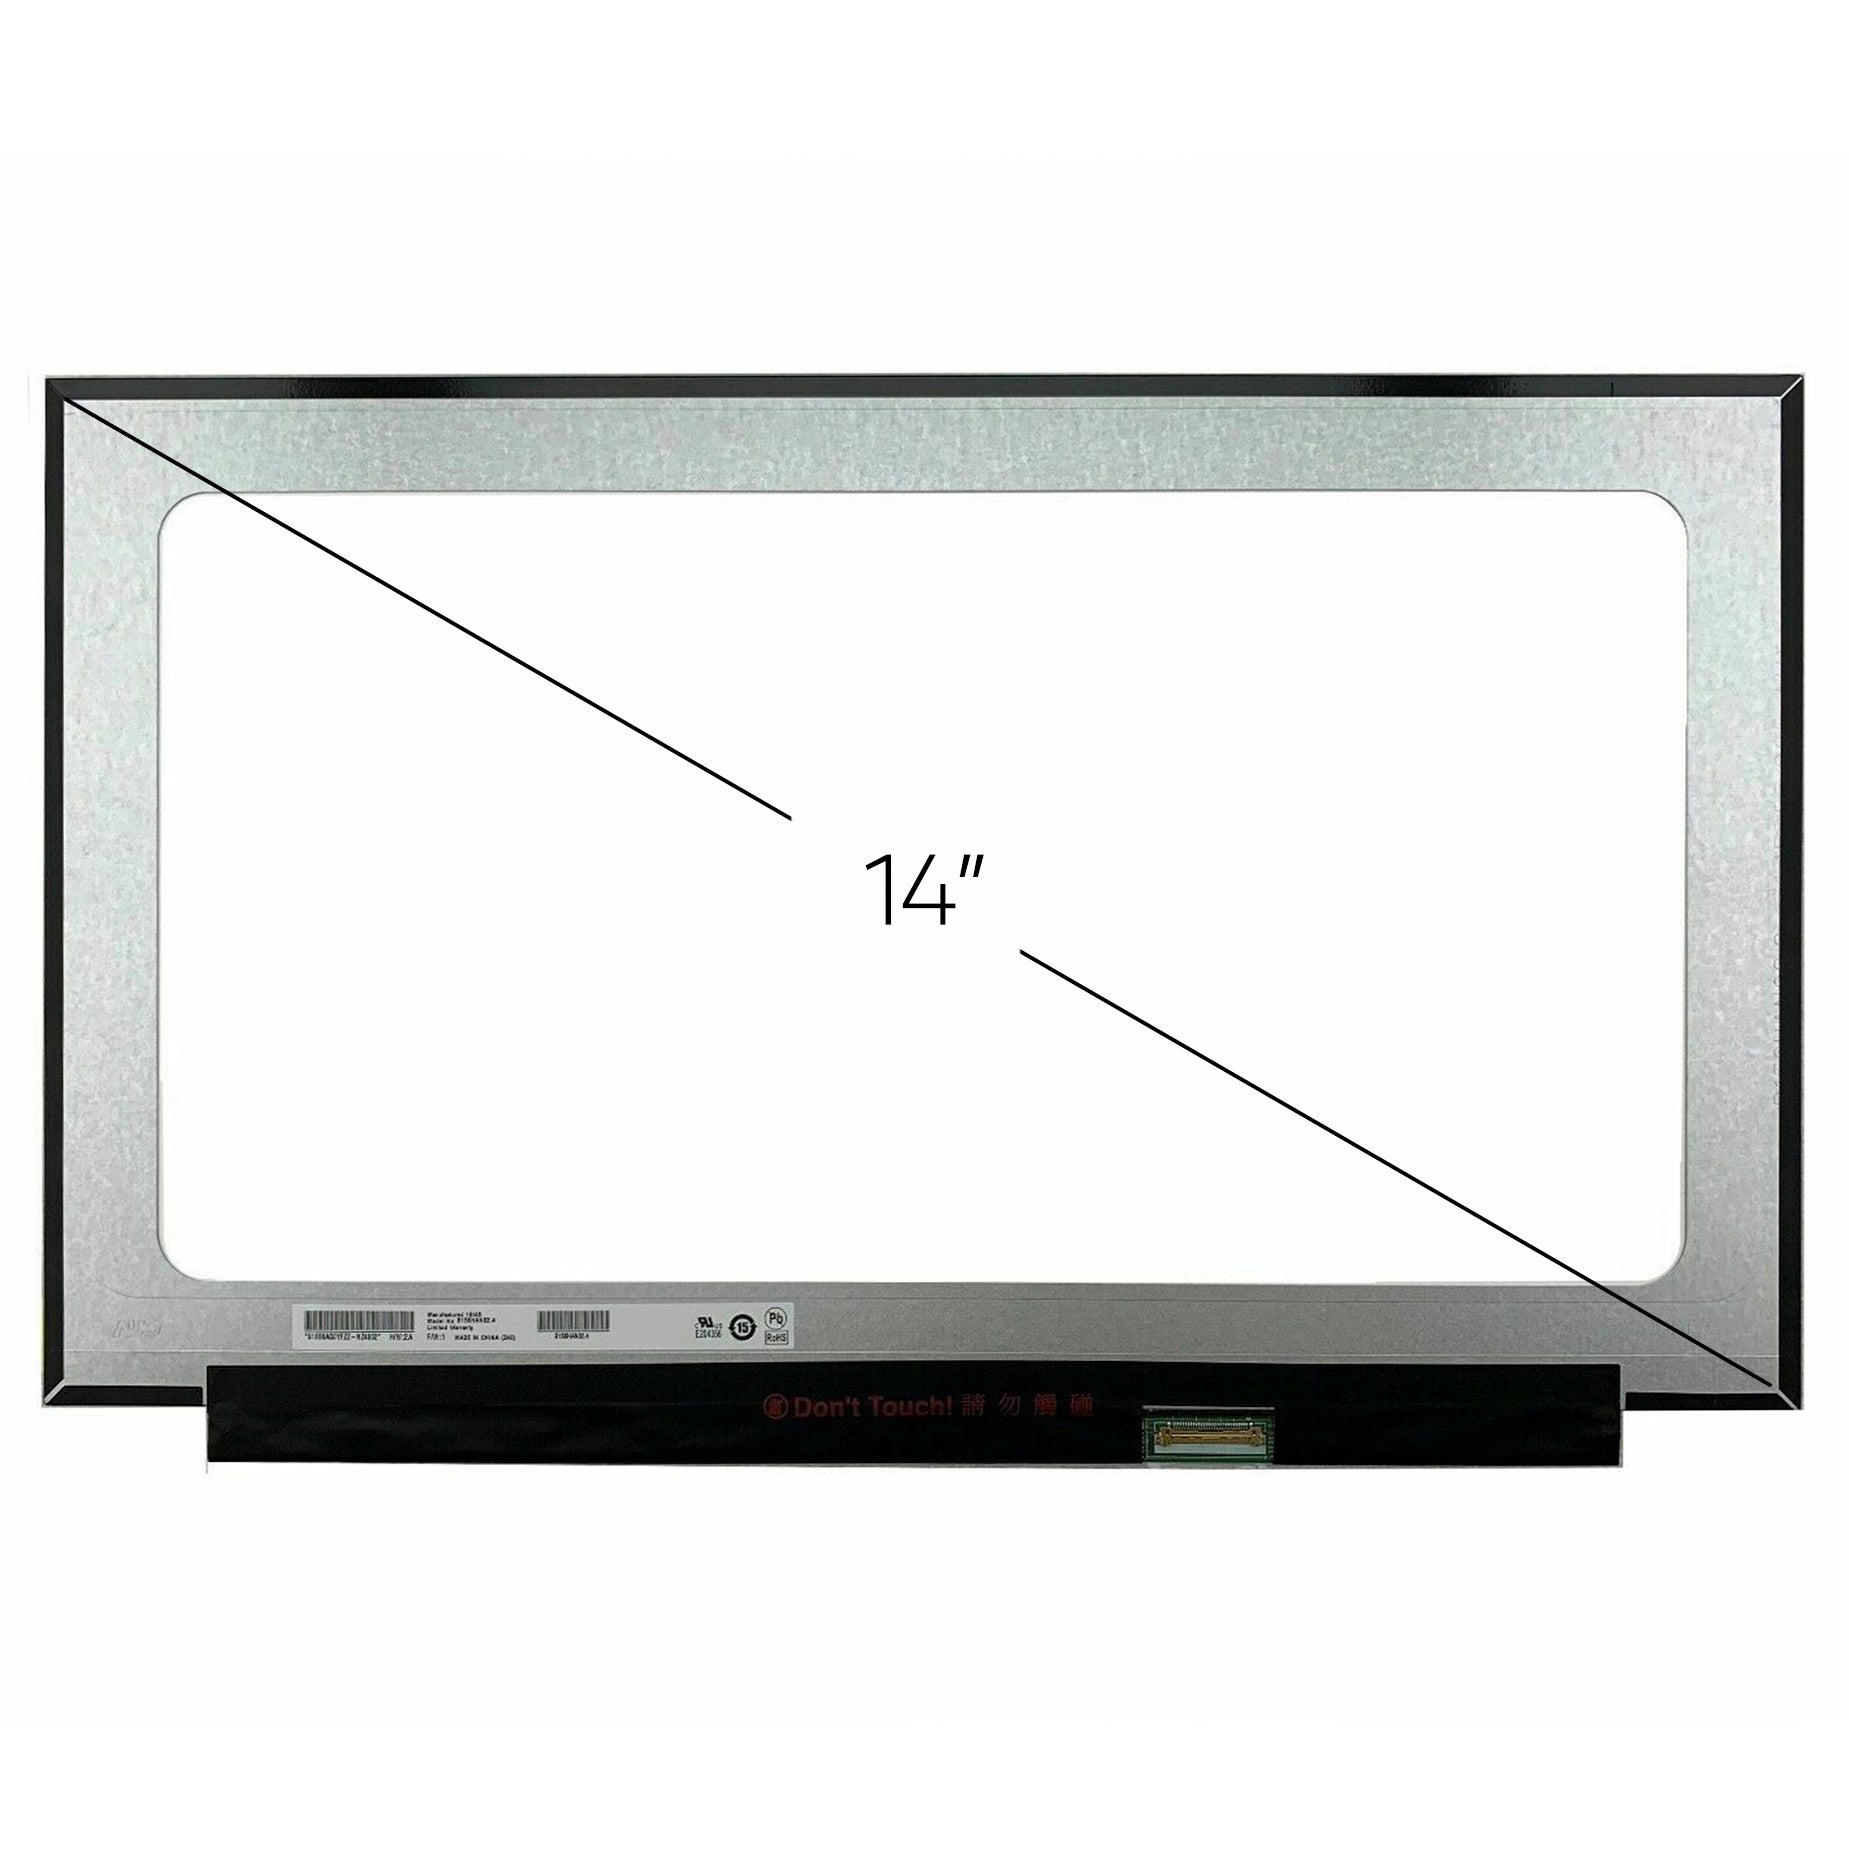 Screen Replacement for NT140WHM-N46 HD 1366x768 LCD LED Display